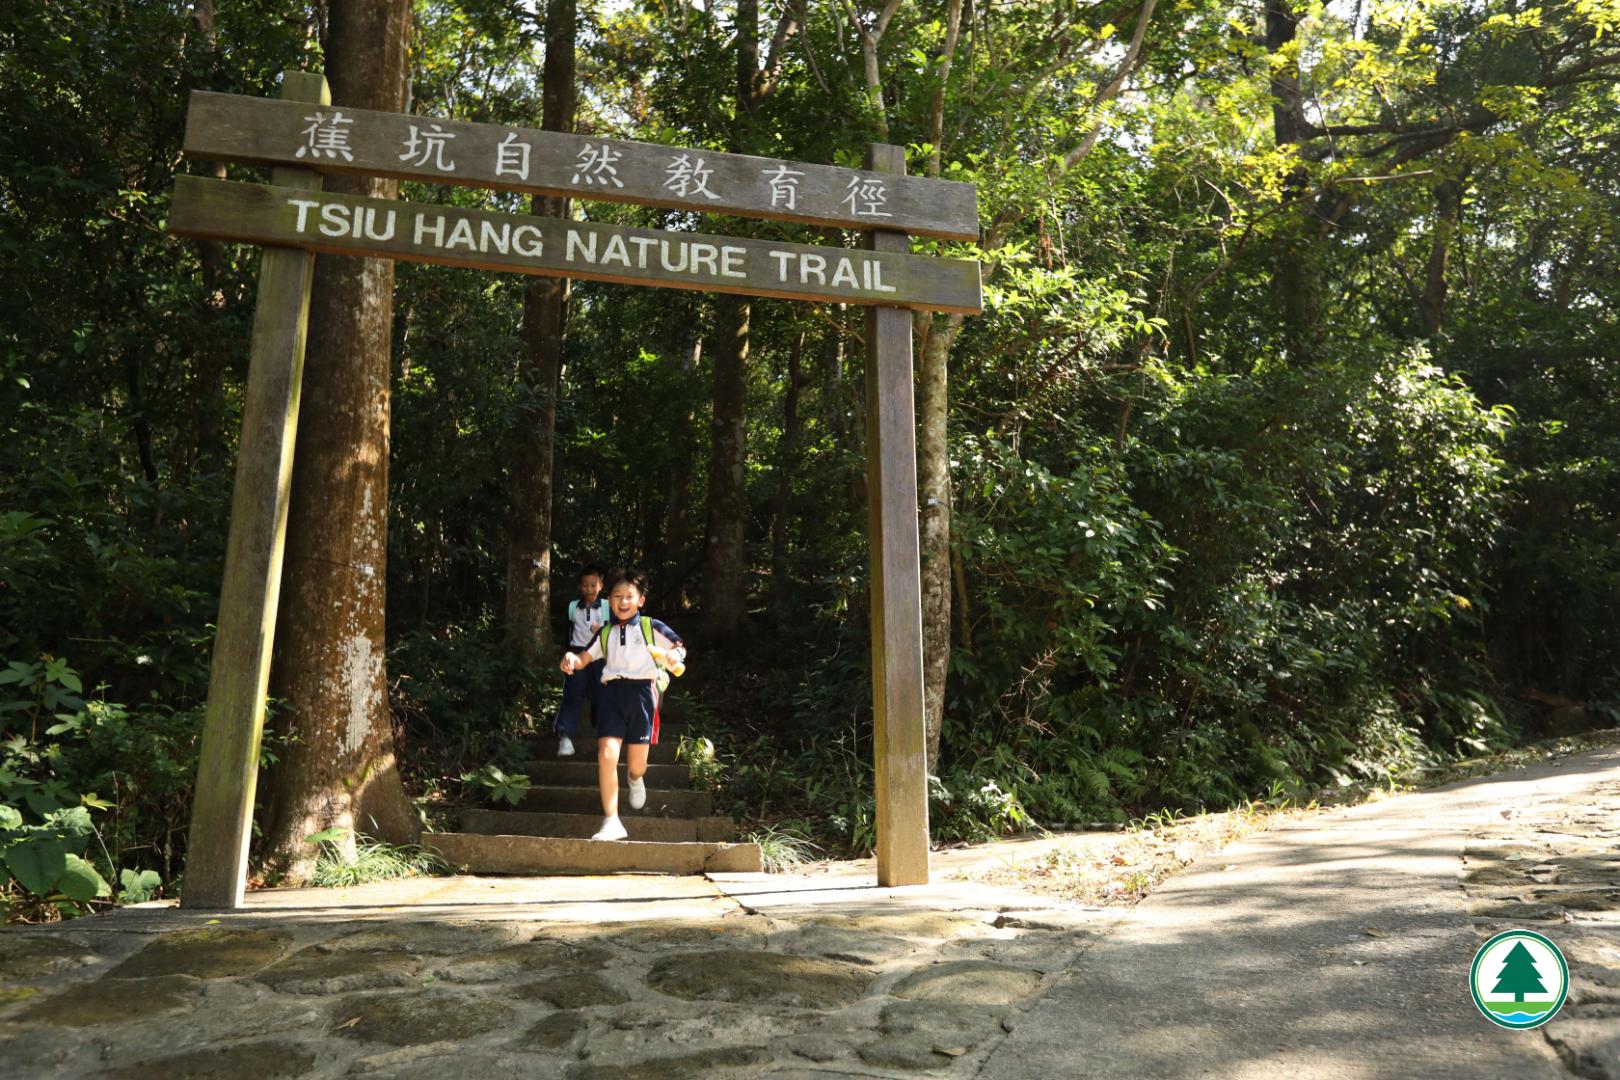 Amp up your adventure by traveling to Sai Kung and explore the Tsui Hang Nature Trail. This is a short and eventful yet relatively undiscovered trail.